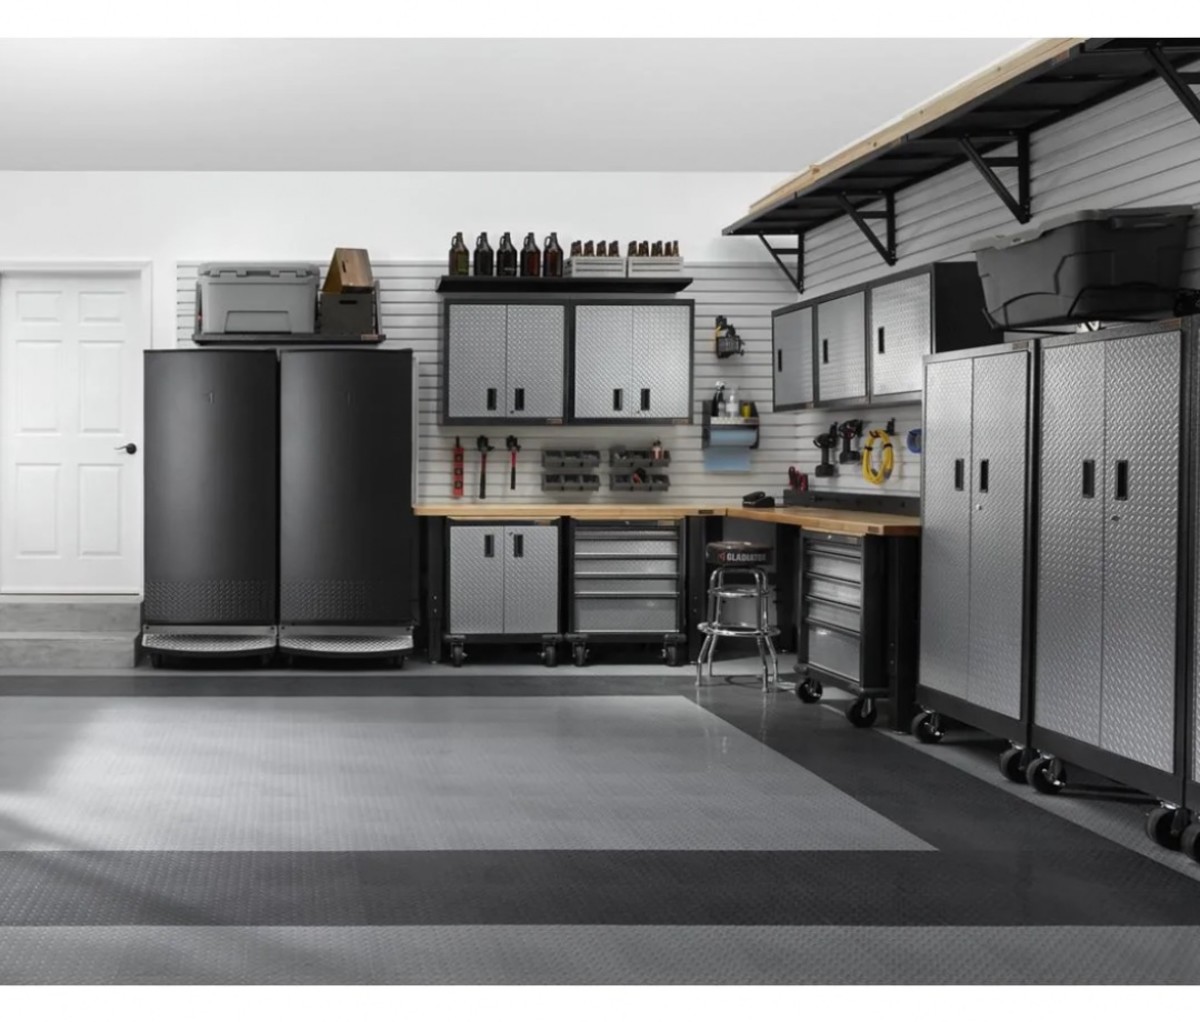 Gladiator's Smart Storage Solutions Can Organize Any Garage